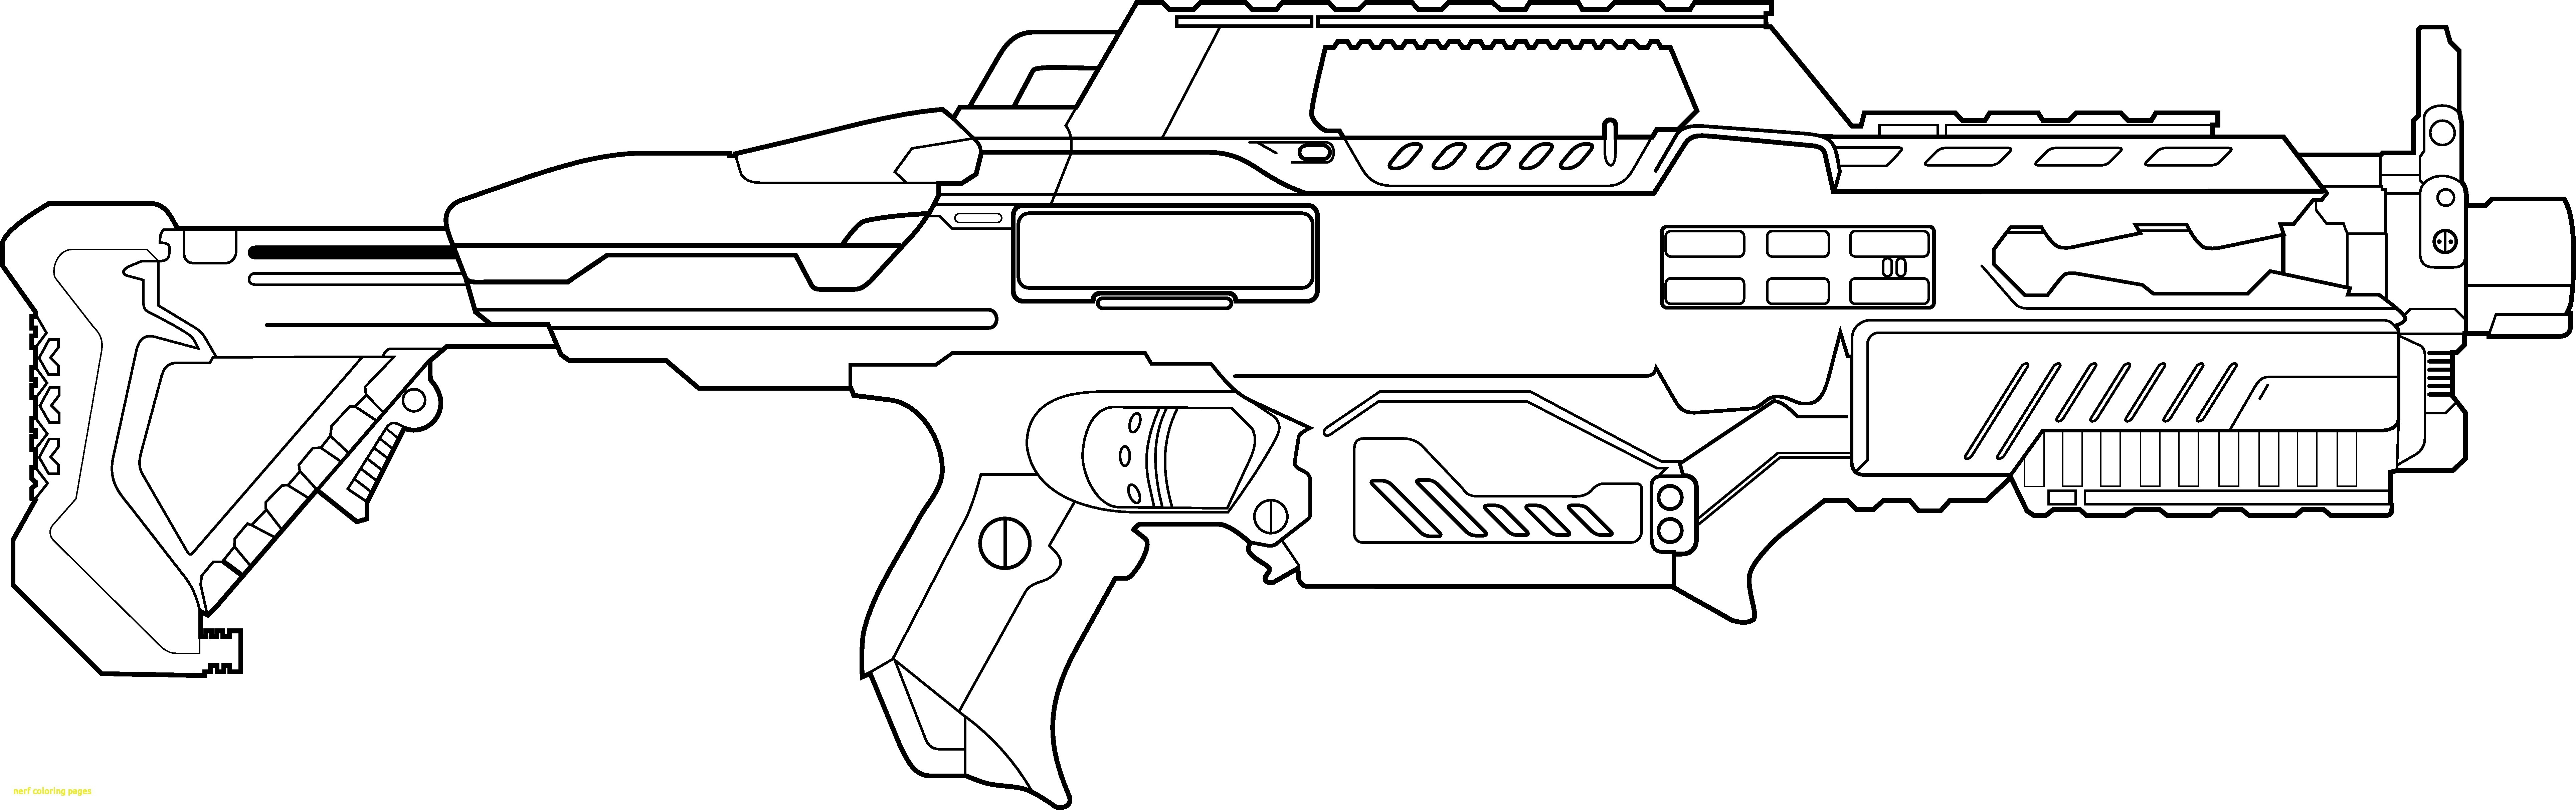 27+ Inspiration Photo of Call Of Duty Coloring Pages - entitlementtrap.com